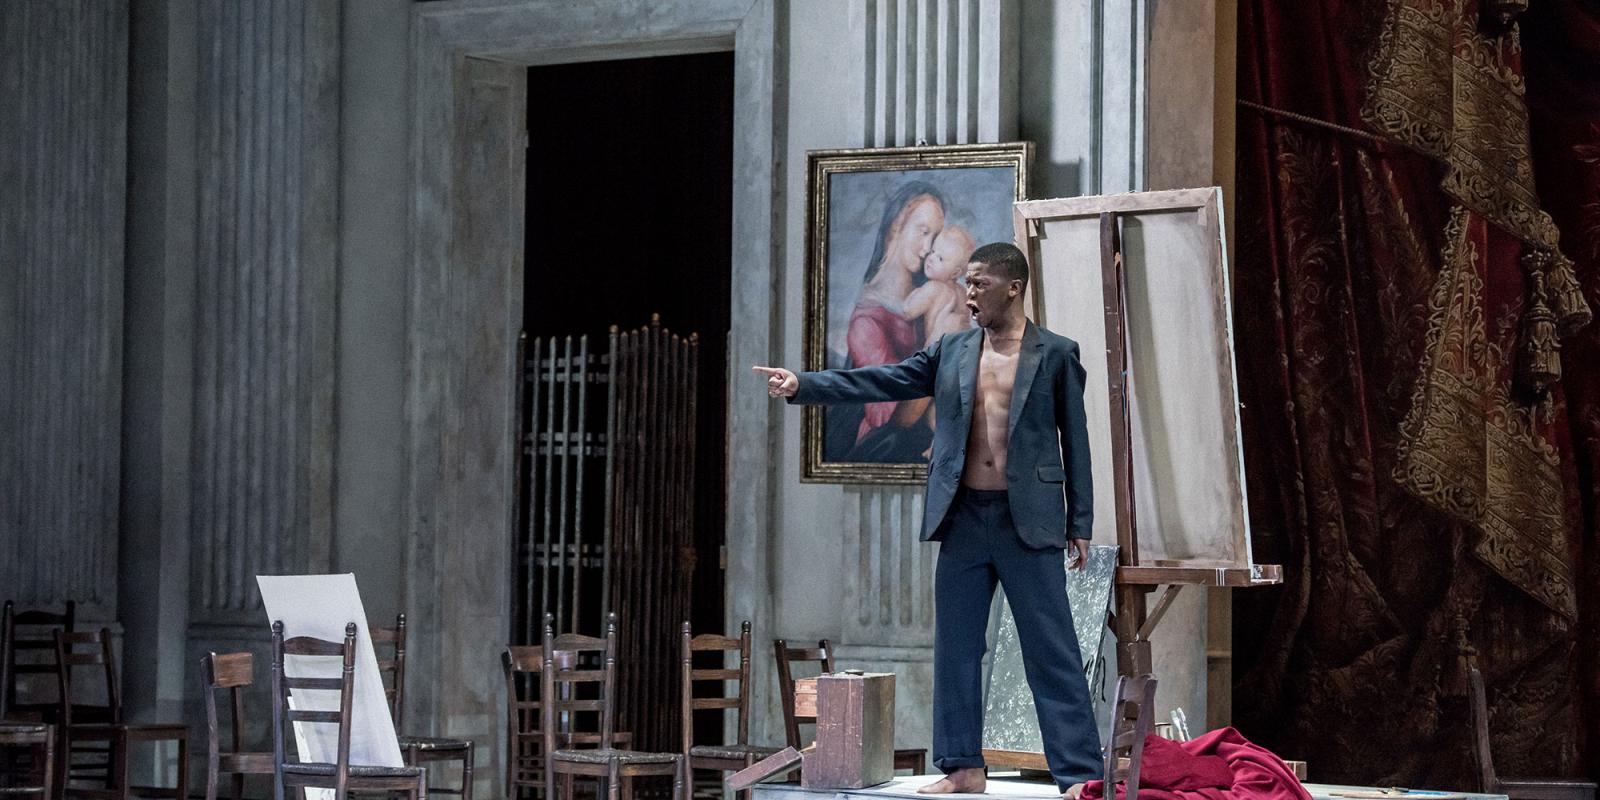 ENO2223 Tosca: Msimelelo Mbali as Angelotti © Genevieve Girling